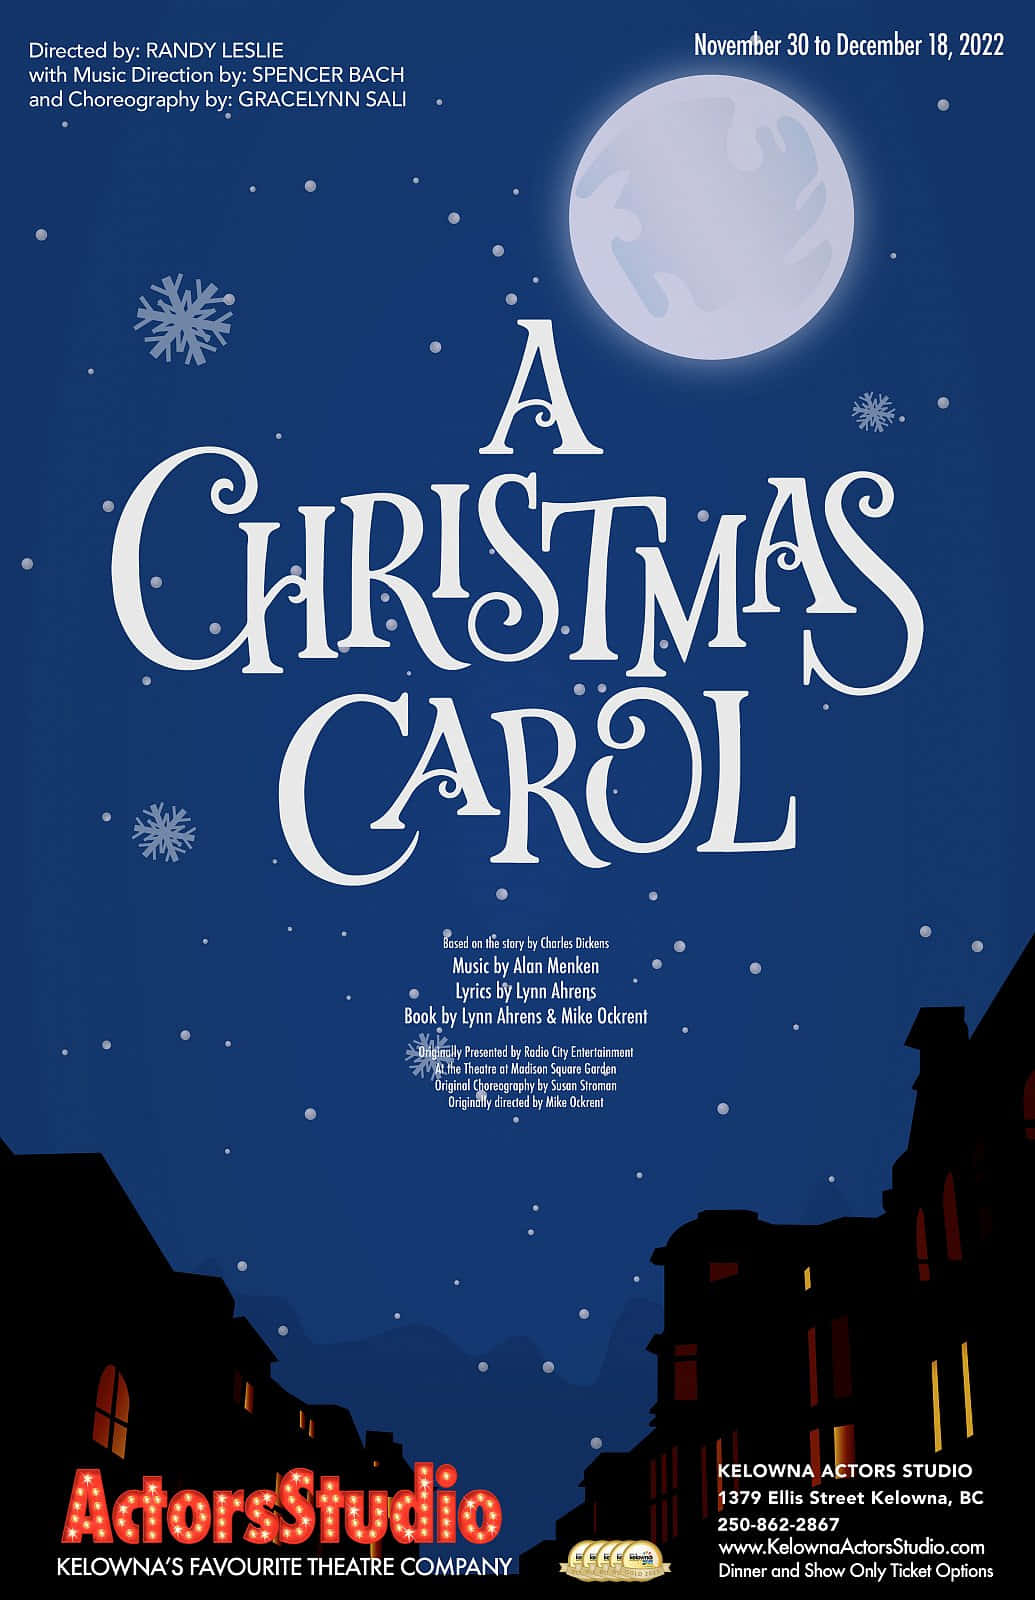 Download A Christmas Carol Poster With A Moon And A City | Wallpapers.com